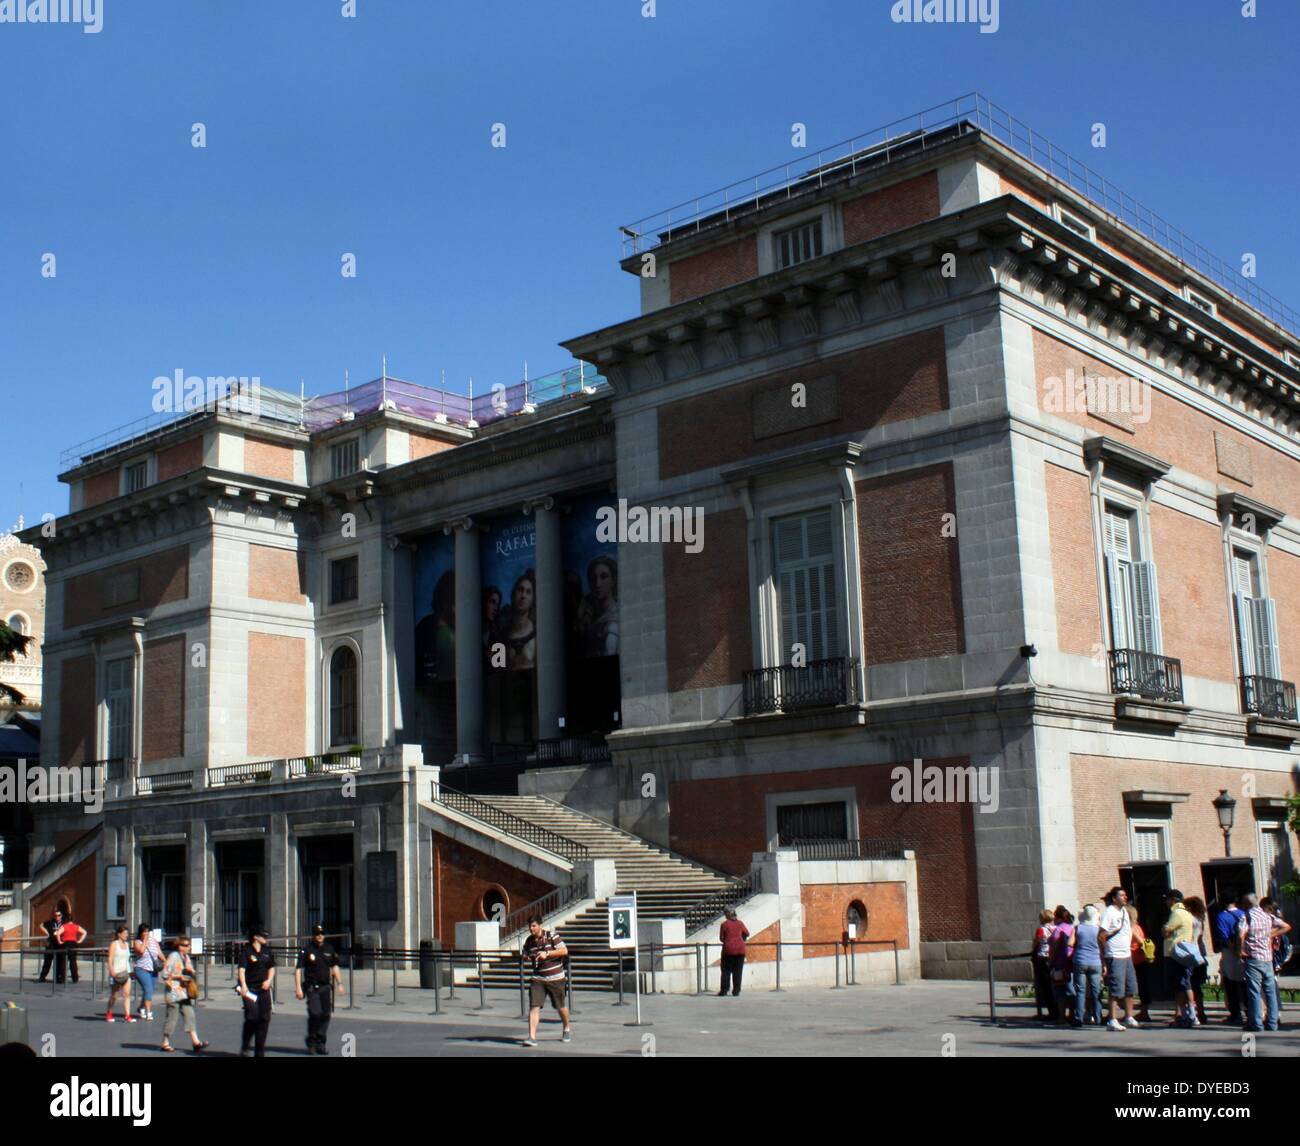 The Museo del Prado. The main Spanish national art museum located in central Madrid. Built with a Neoclassical architecture. Madrid. Spain 2013 Stock Photo